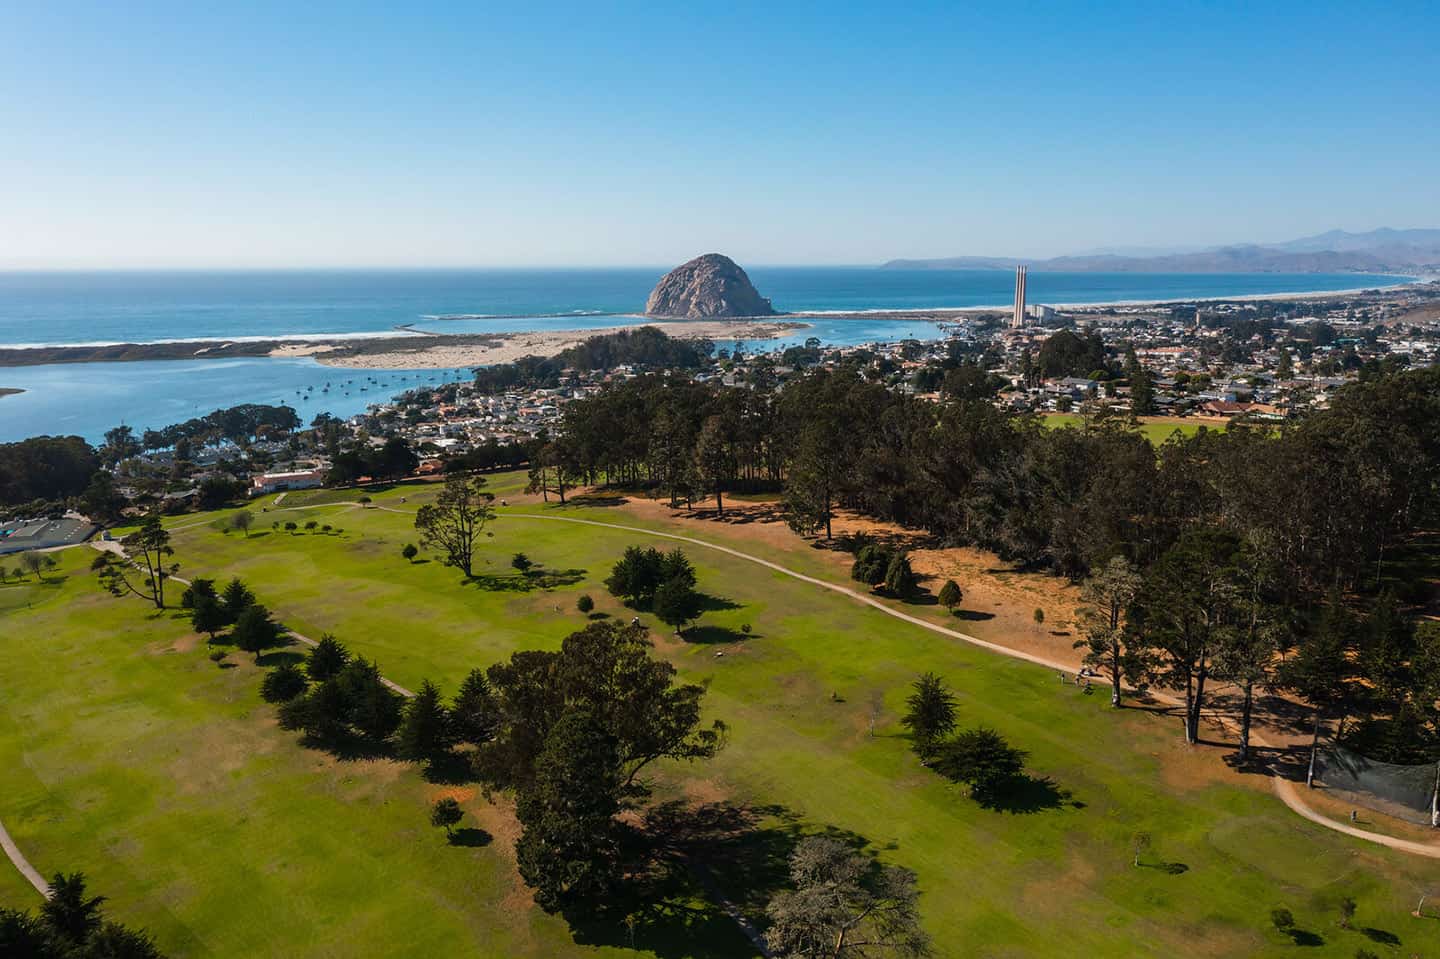 8 Rejuvenating Things to Do in Morro Bay (With Map) - Trips Come True